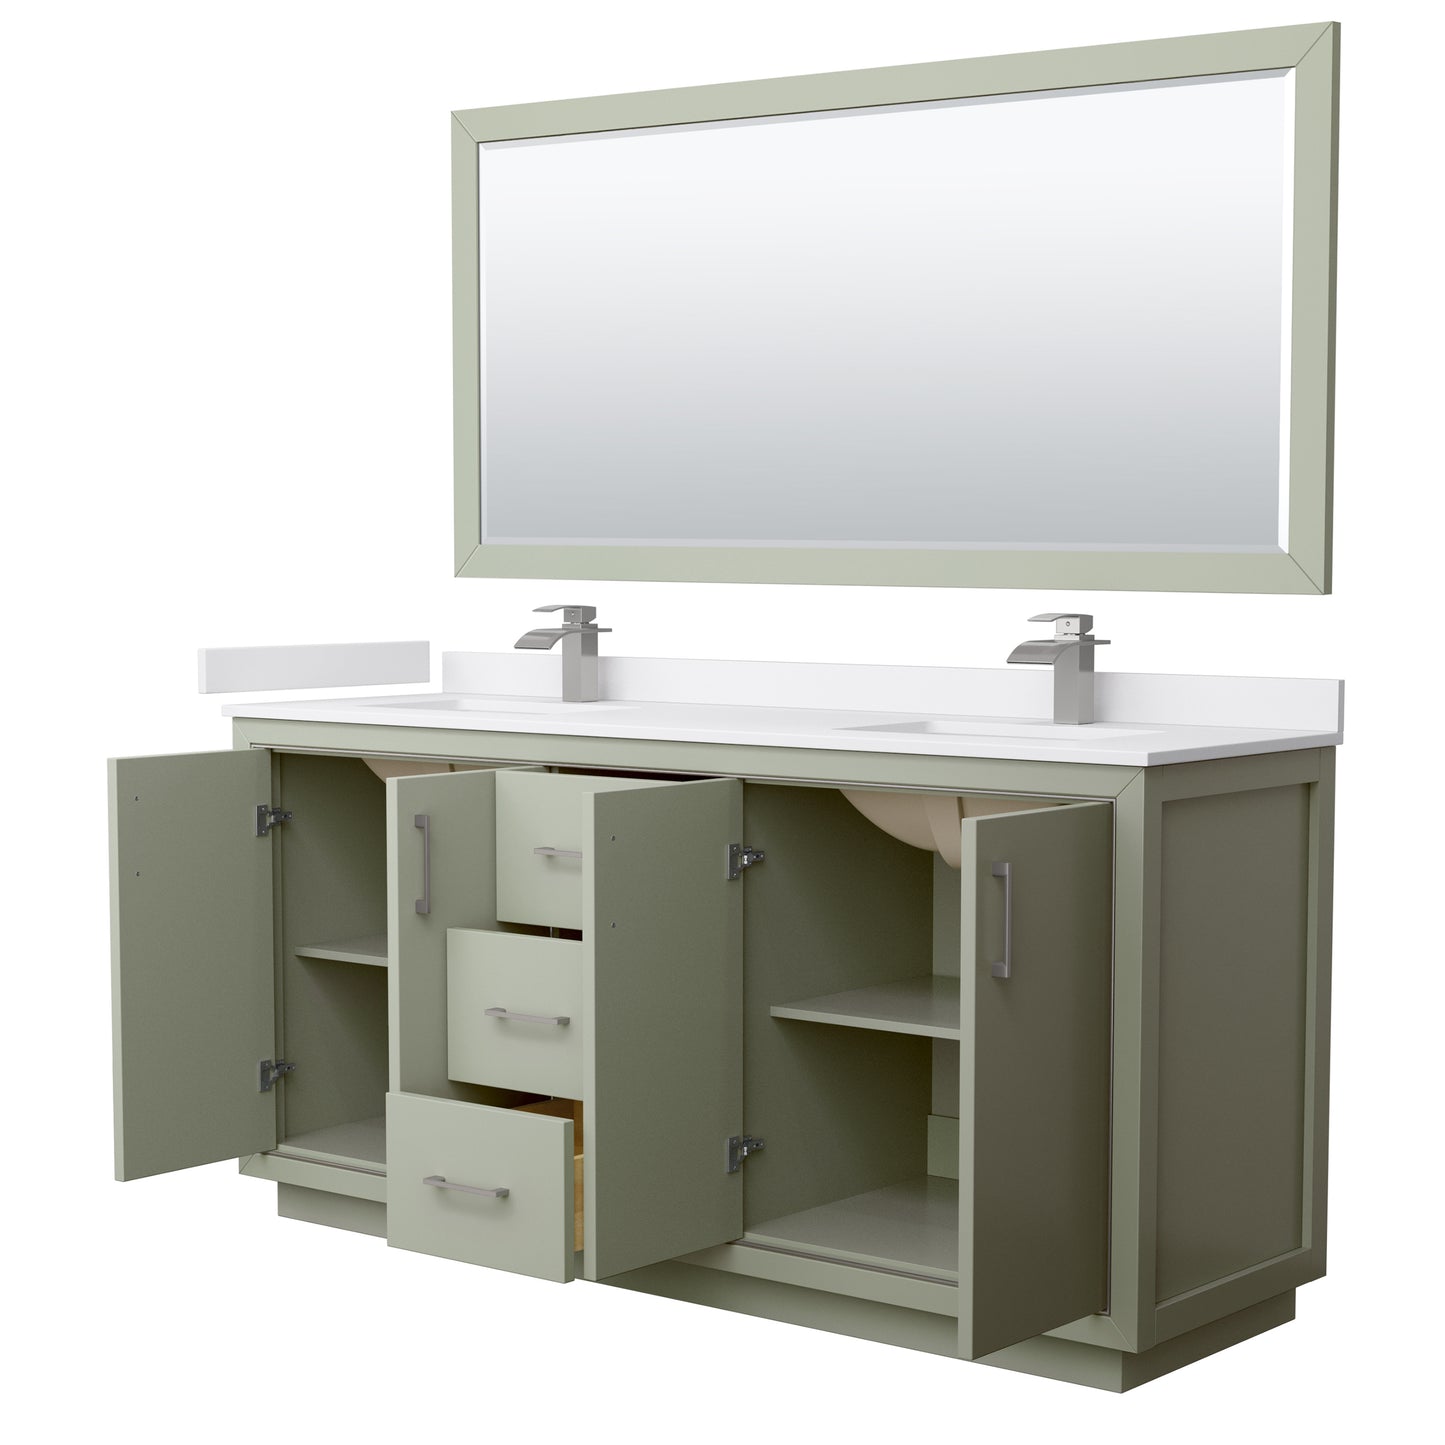 Wyndham Icon 72 Inch Double Bathroom Vanity White Cultured Marble Countertop with Undermount Square Sinks, Brushed Nickel Trim and 70 Inch Mirror - Luxe Bathroom Vanities